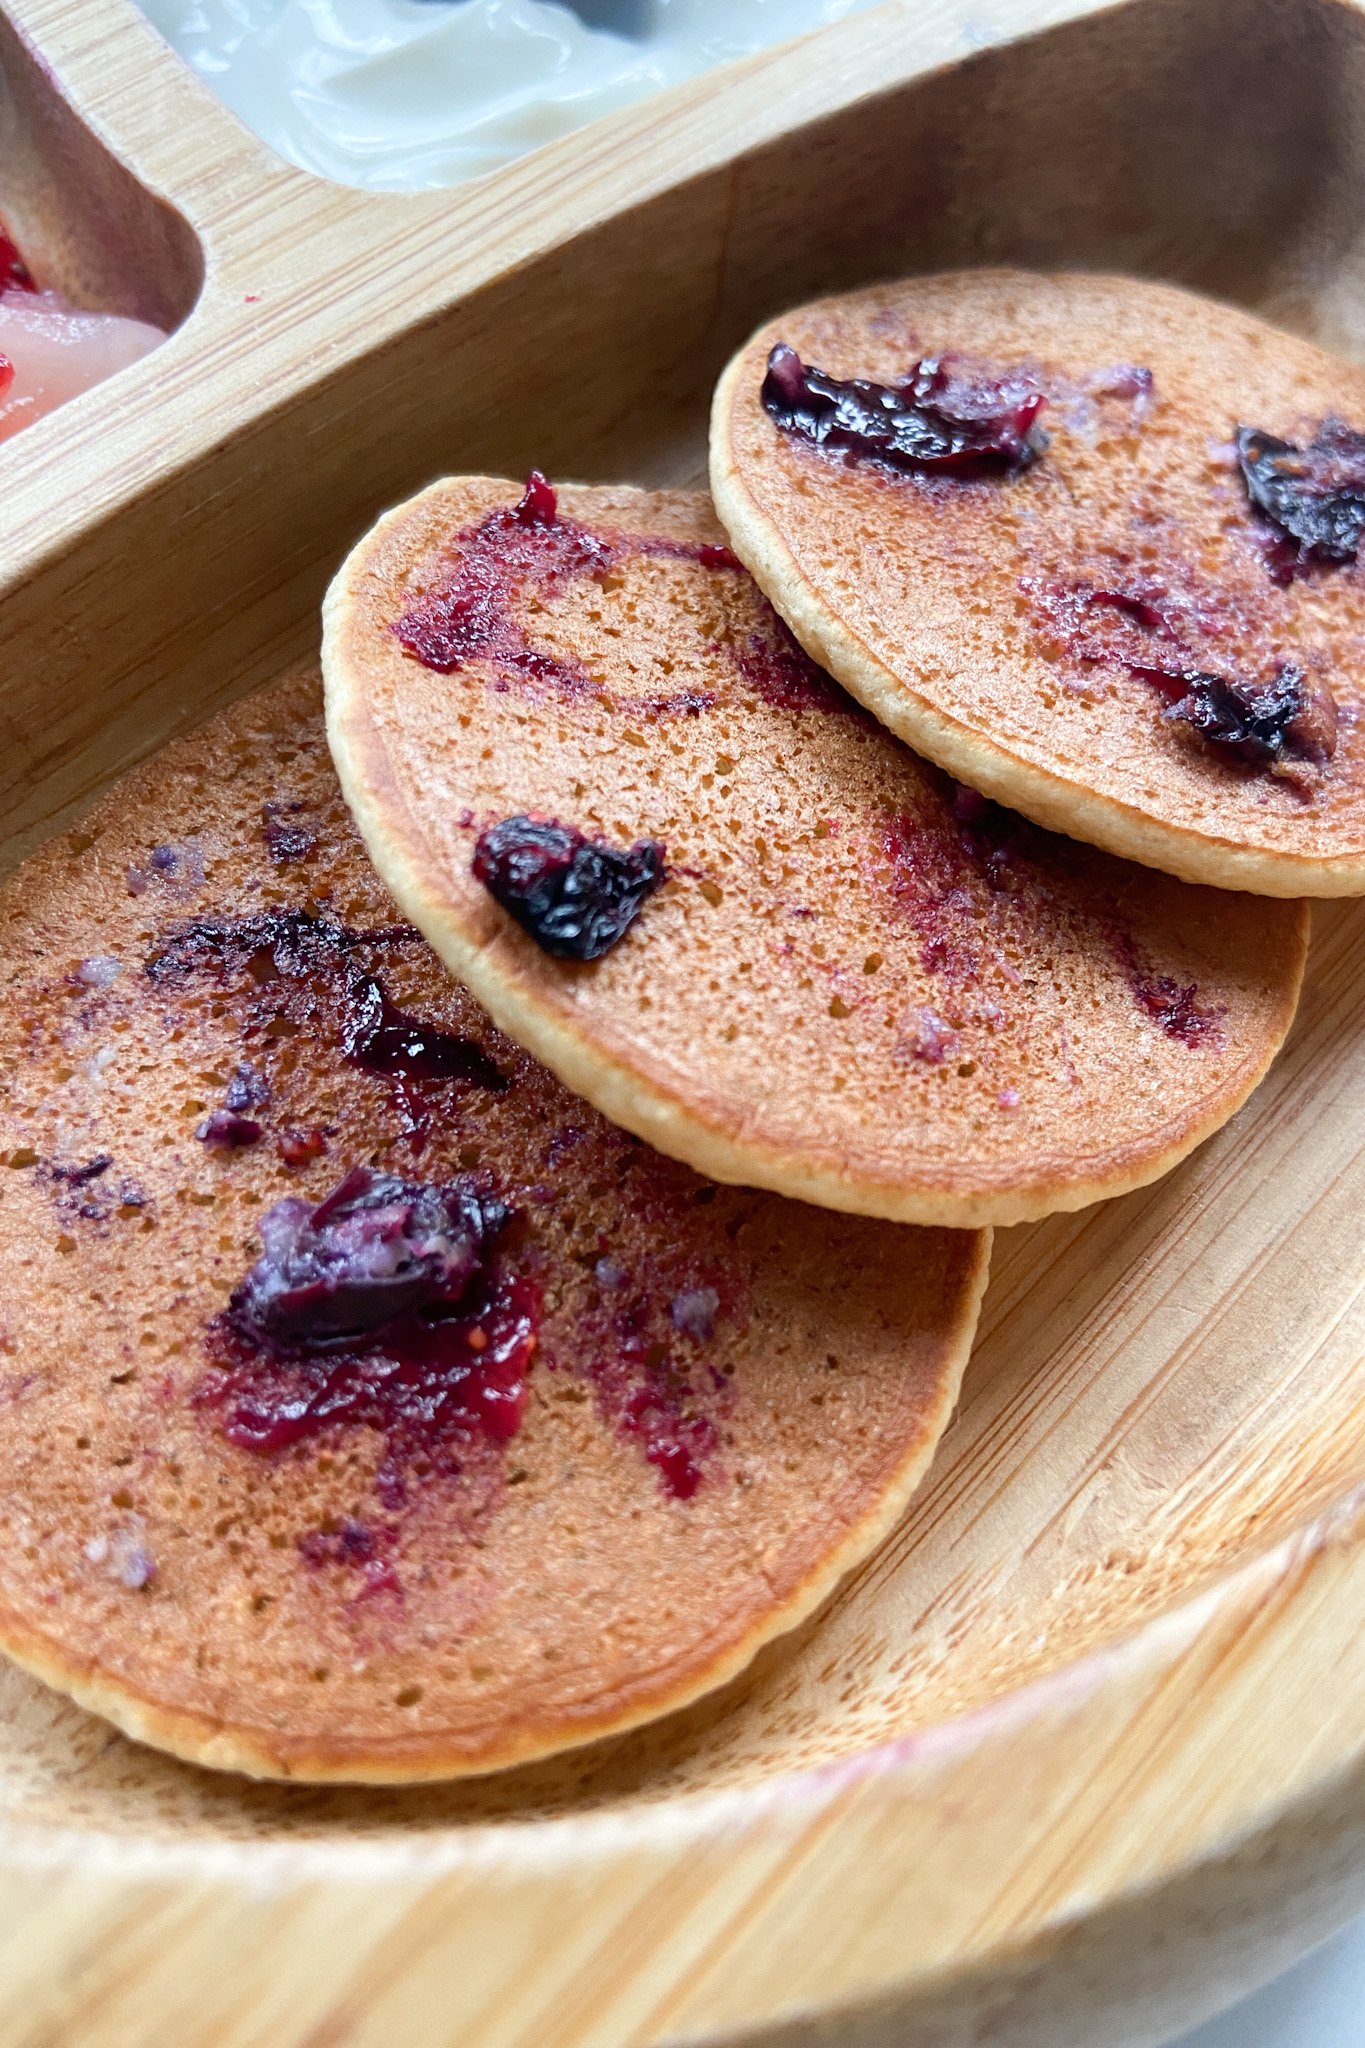 Blueberry oat pancakes served on a wooden plate